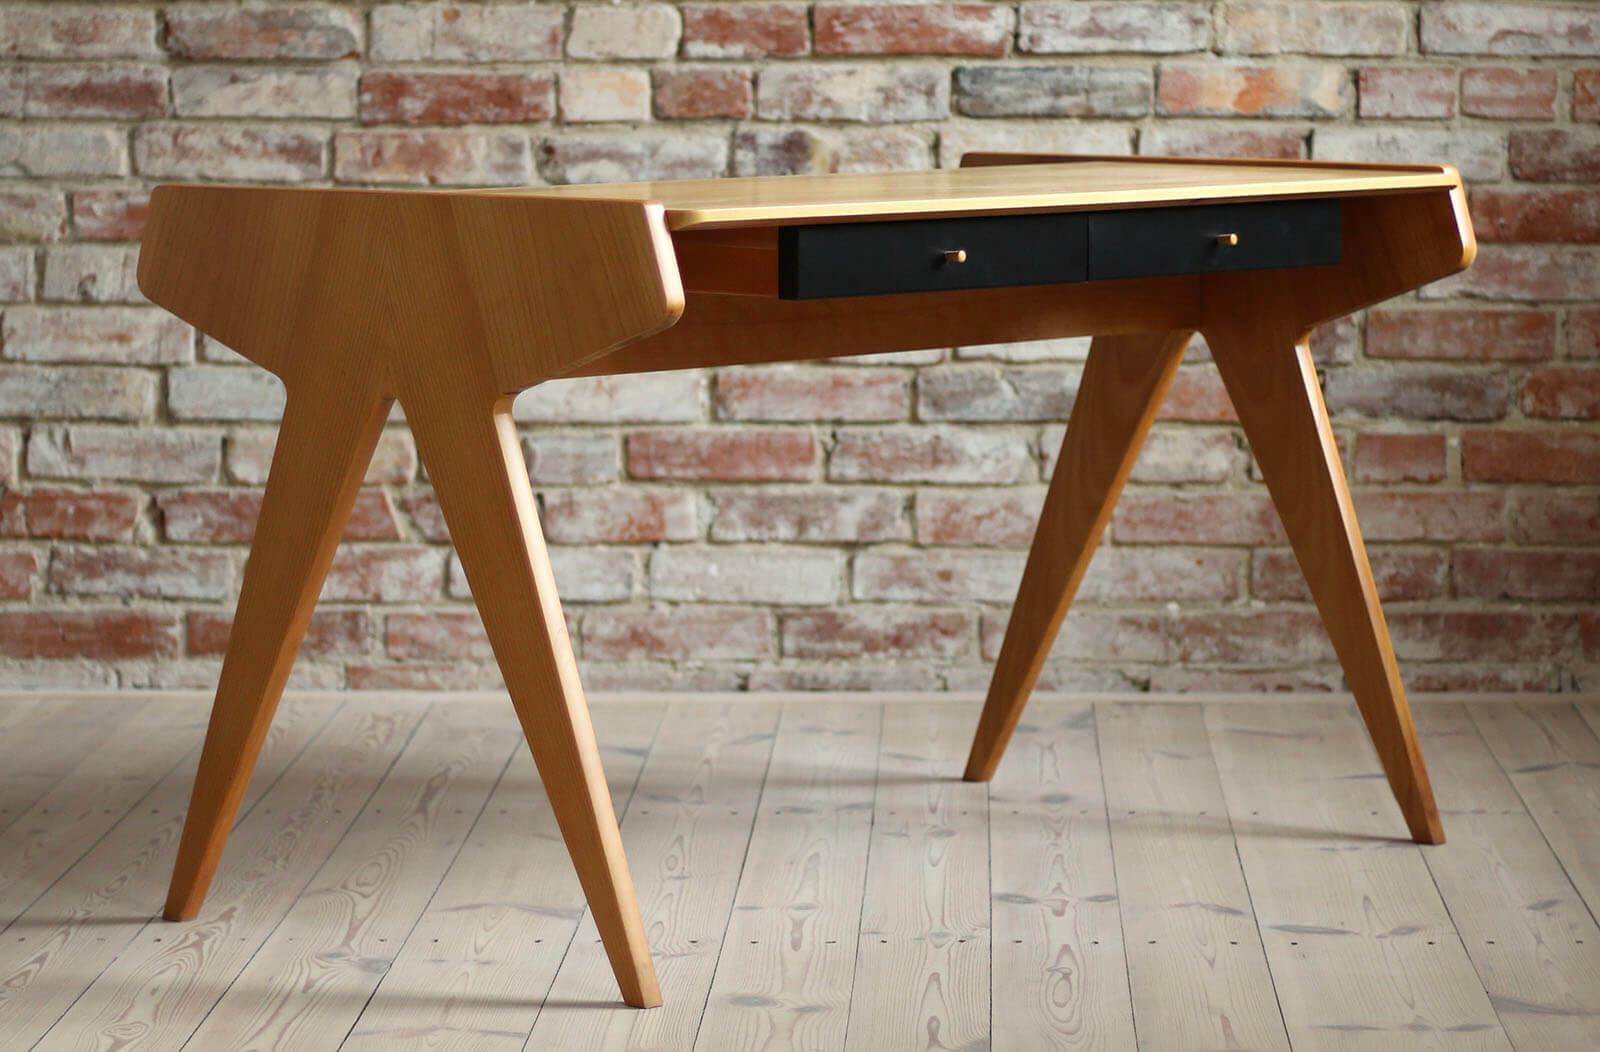 This desk was designed by Helmut Magg in 1950s and produced by Neue Gemeinschaft für Wohnkultur, WK Möbel and still has the original label in one of the drawers. The design is simple yet very elegant. It features a section with 2 drawers on one side